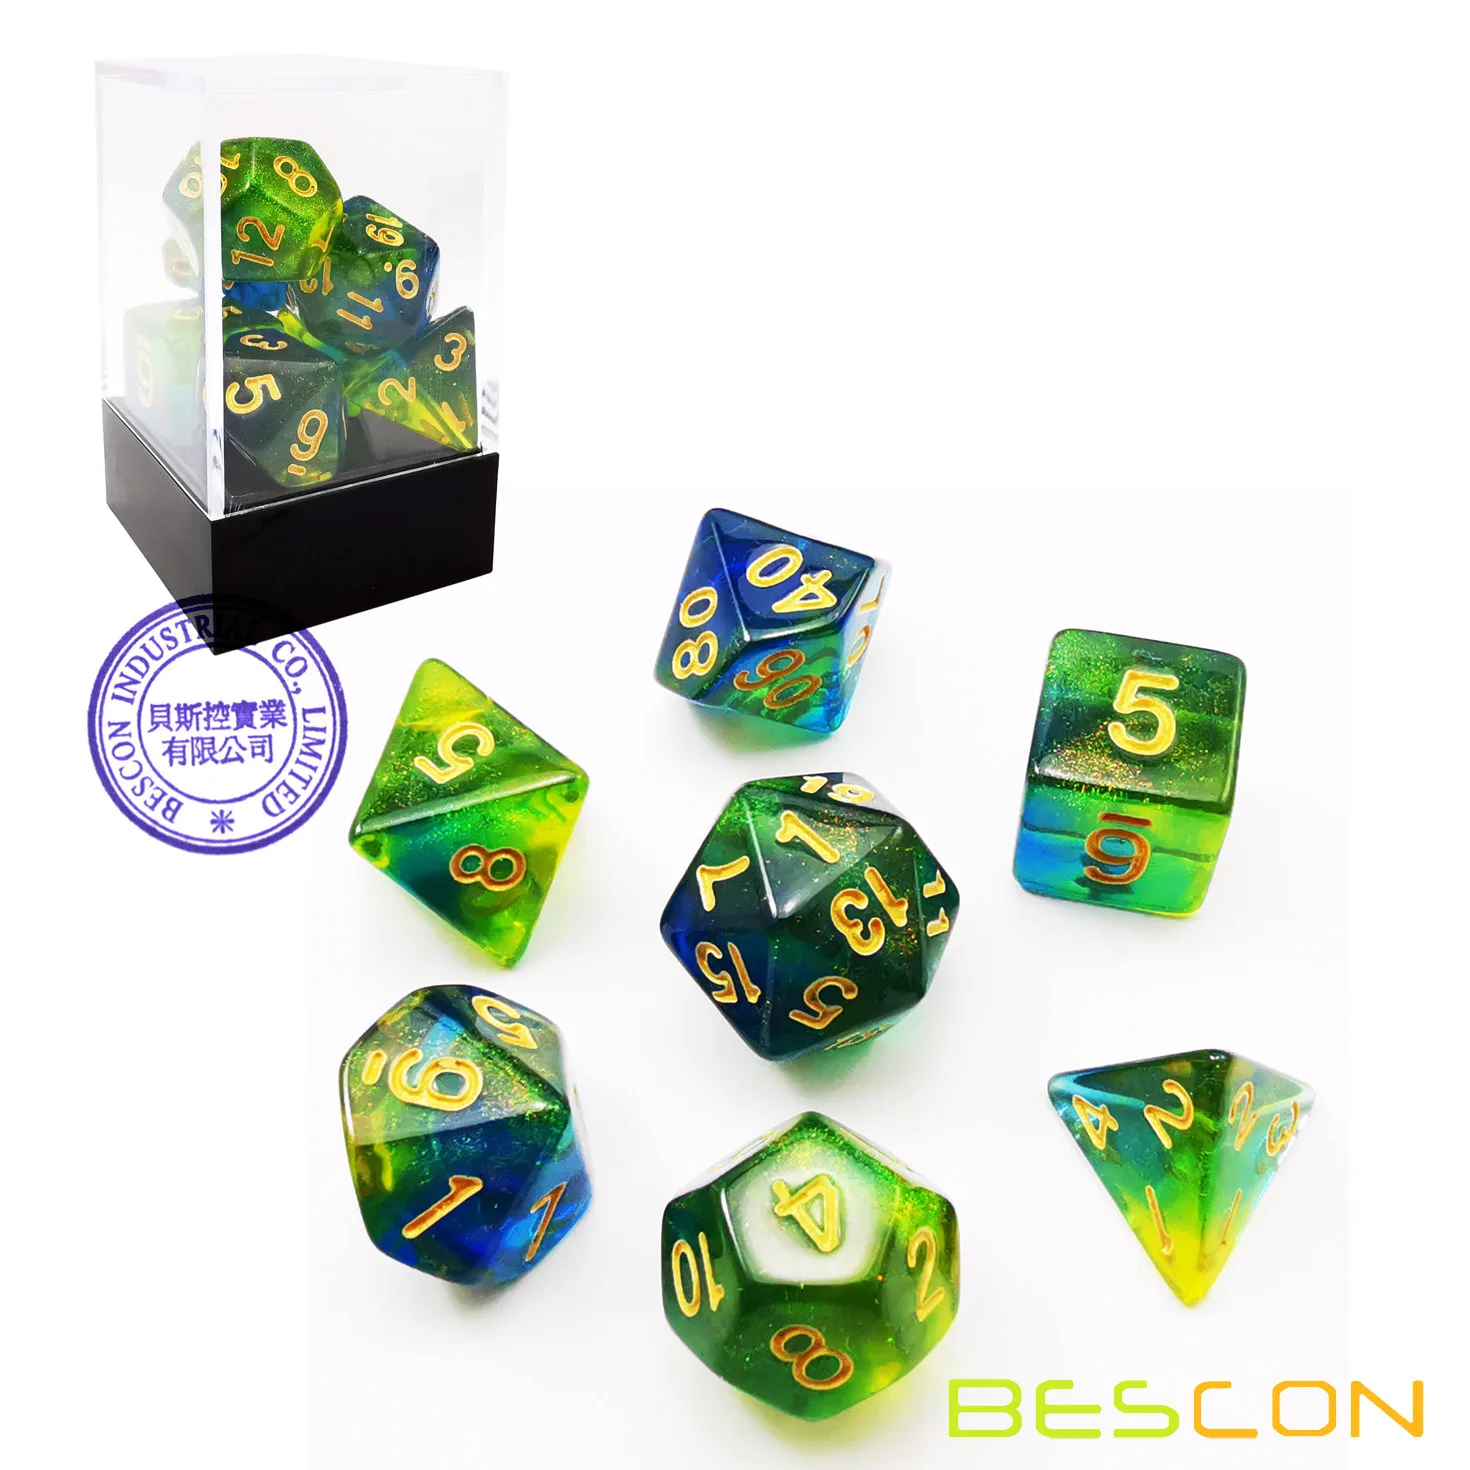 Bescon New Moonstone Dice Azure Stone Polyhedral Dice Set of 7 